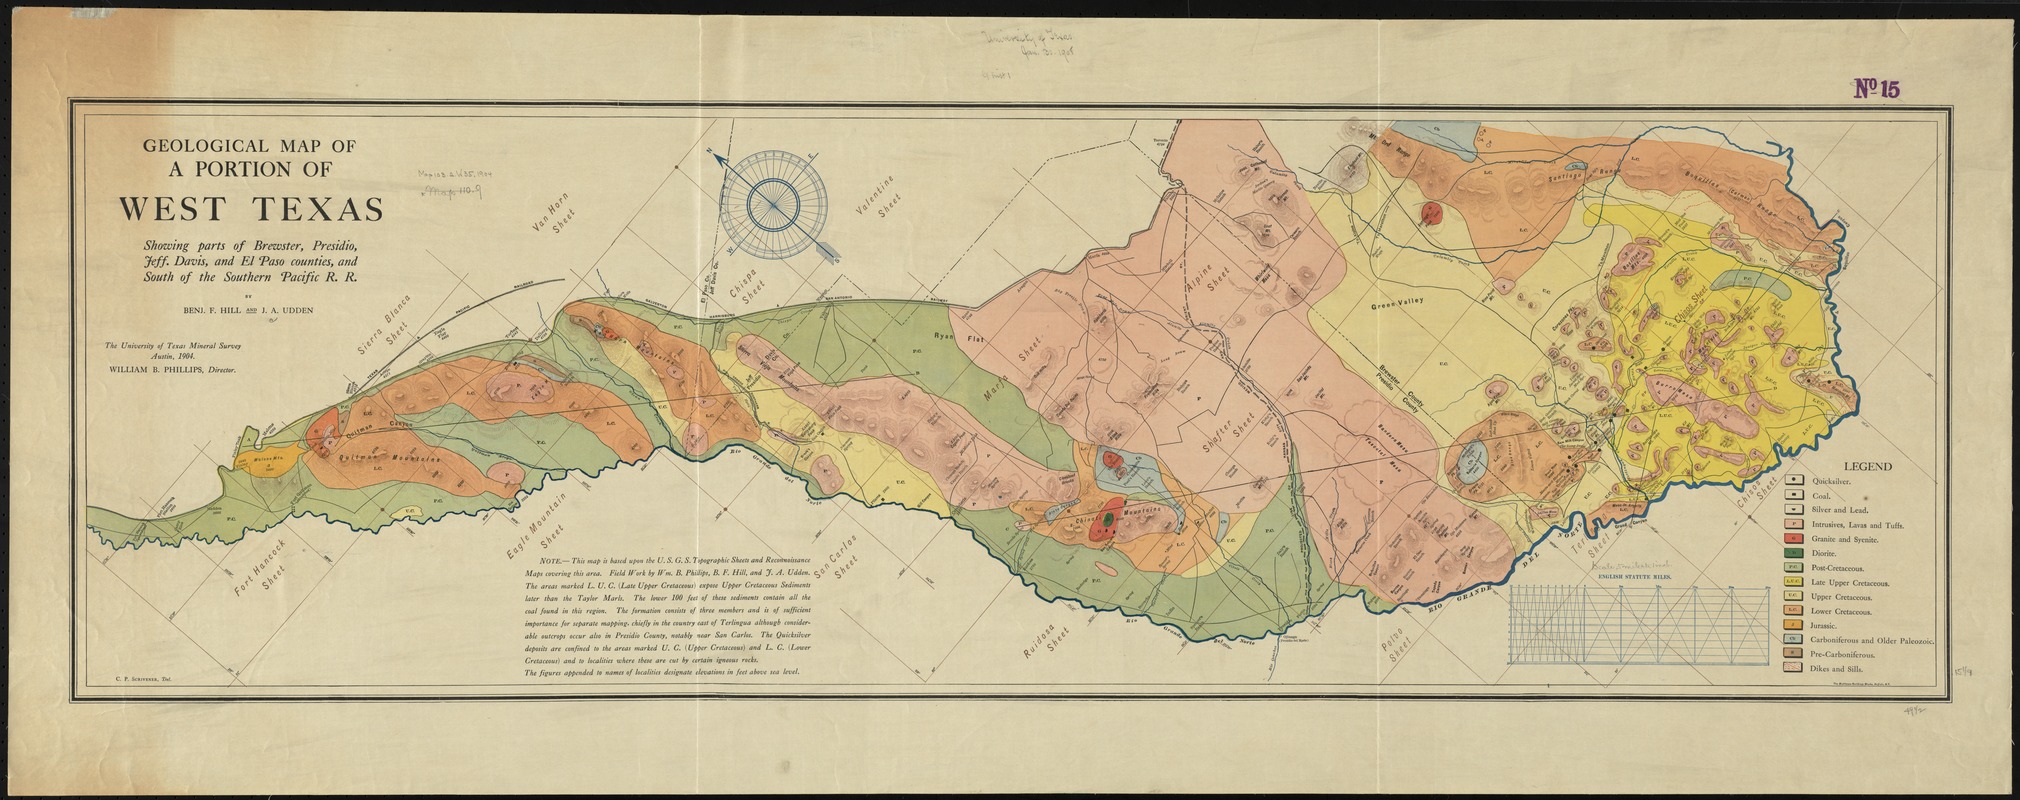 Geological map of a portion of West Texas